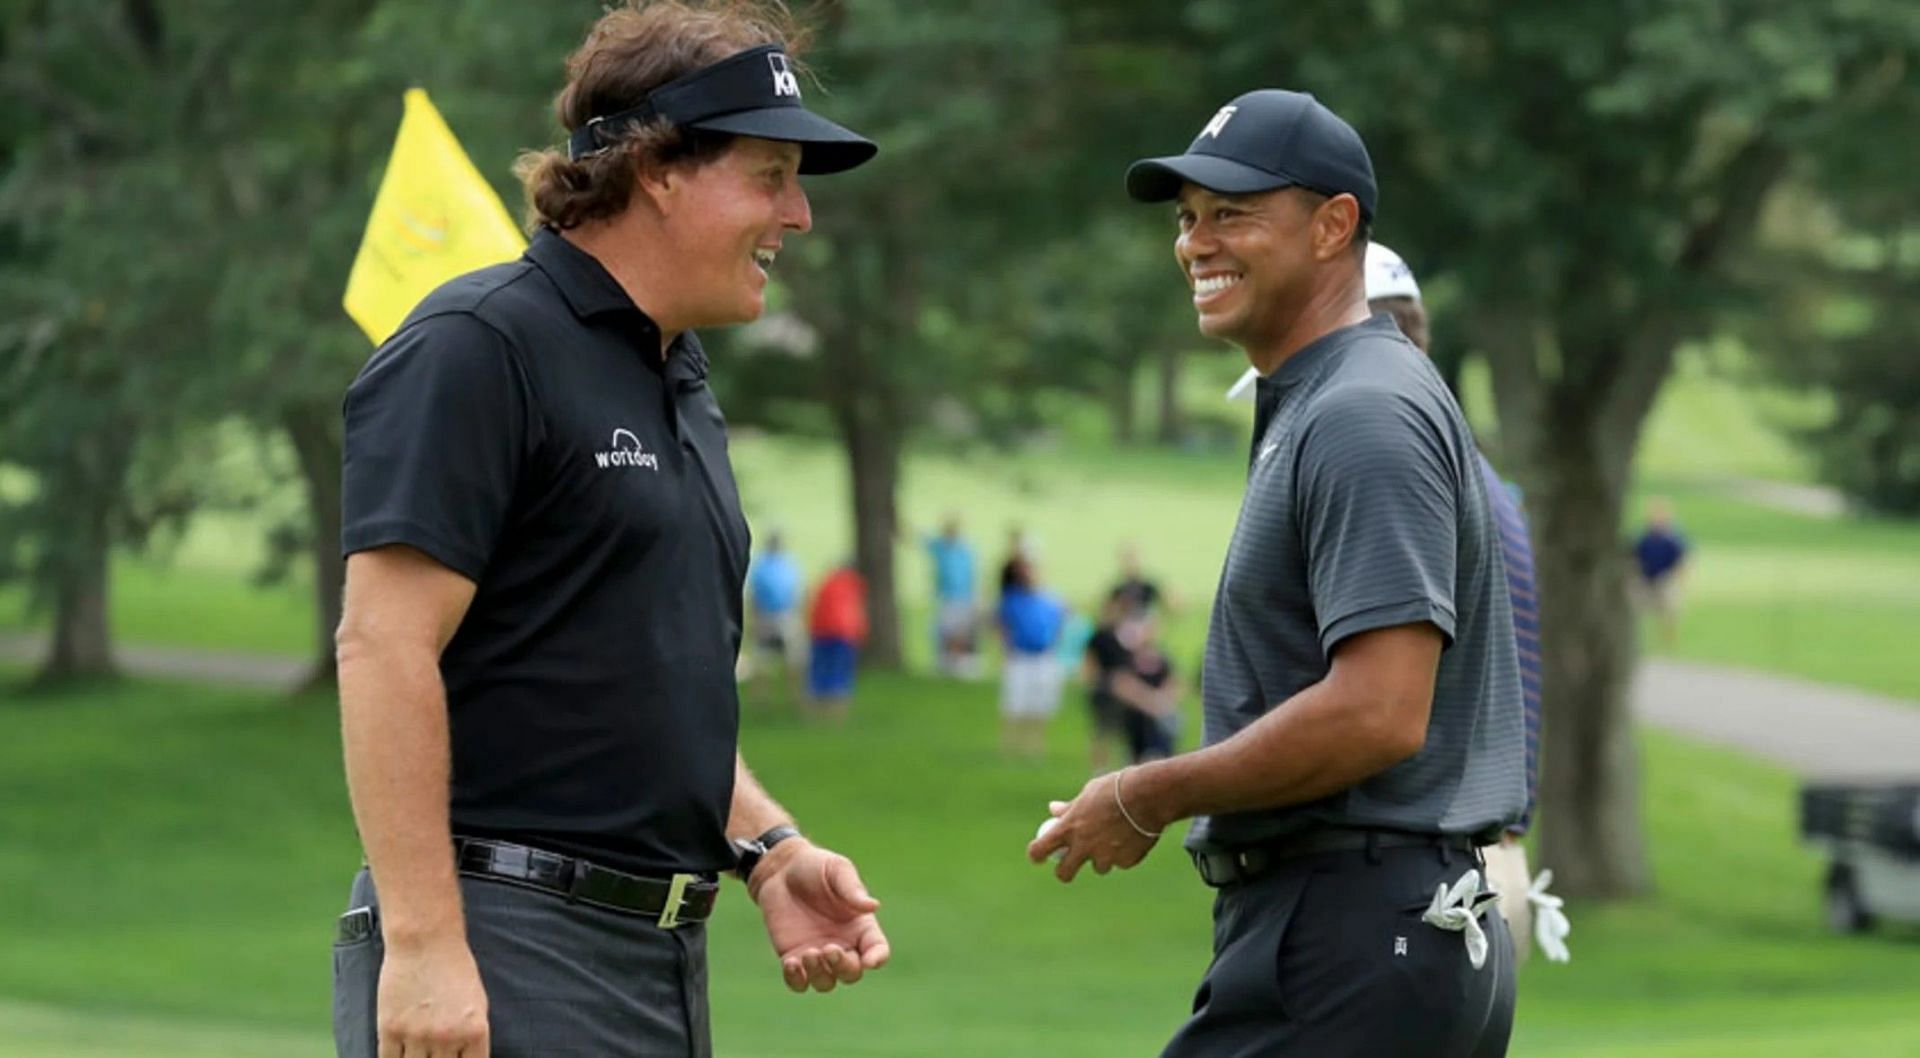 Tiger Woods and Phil Mickelson (Image via Getty)